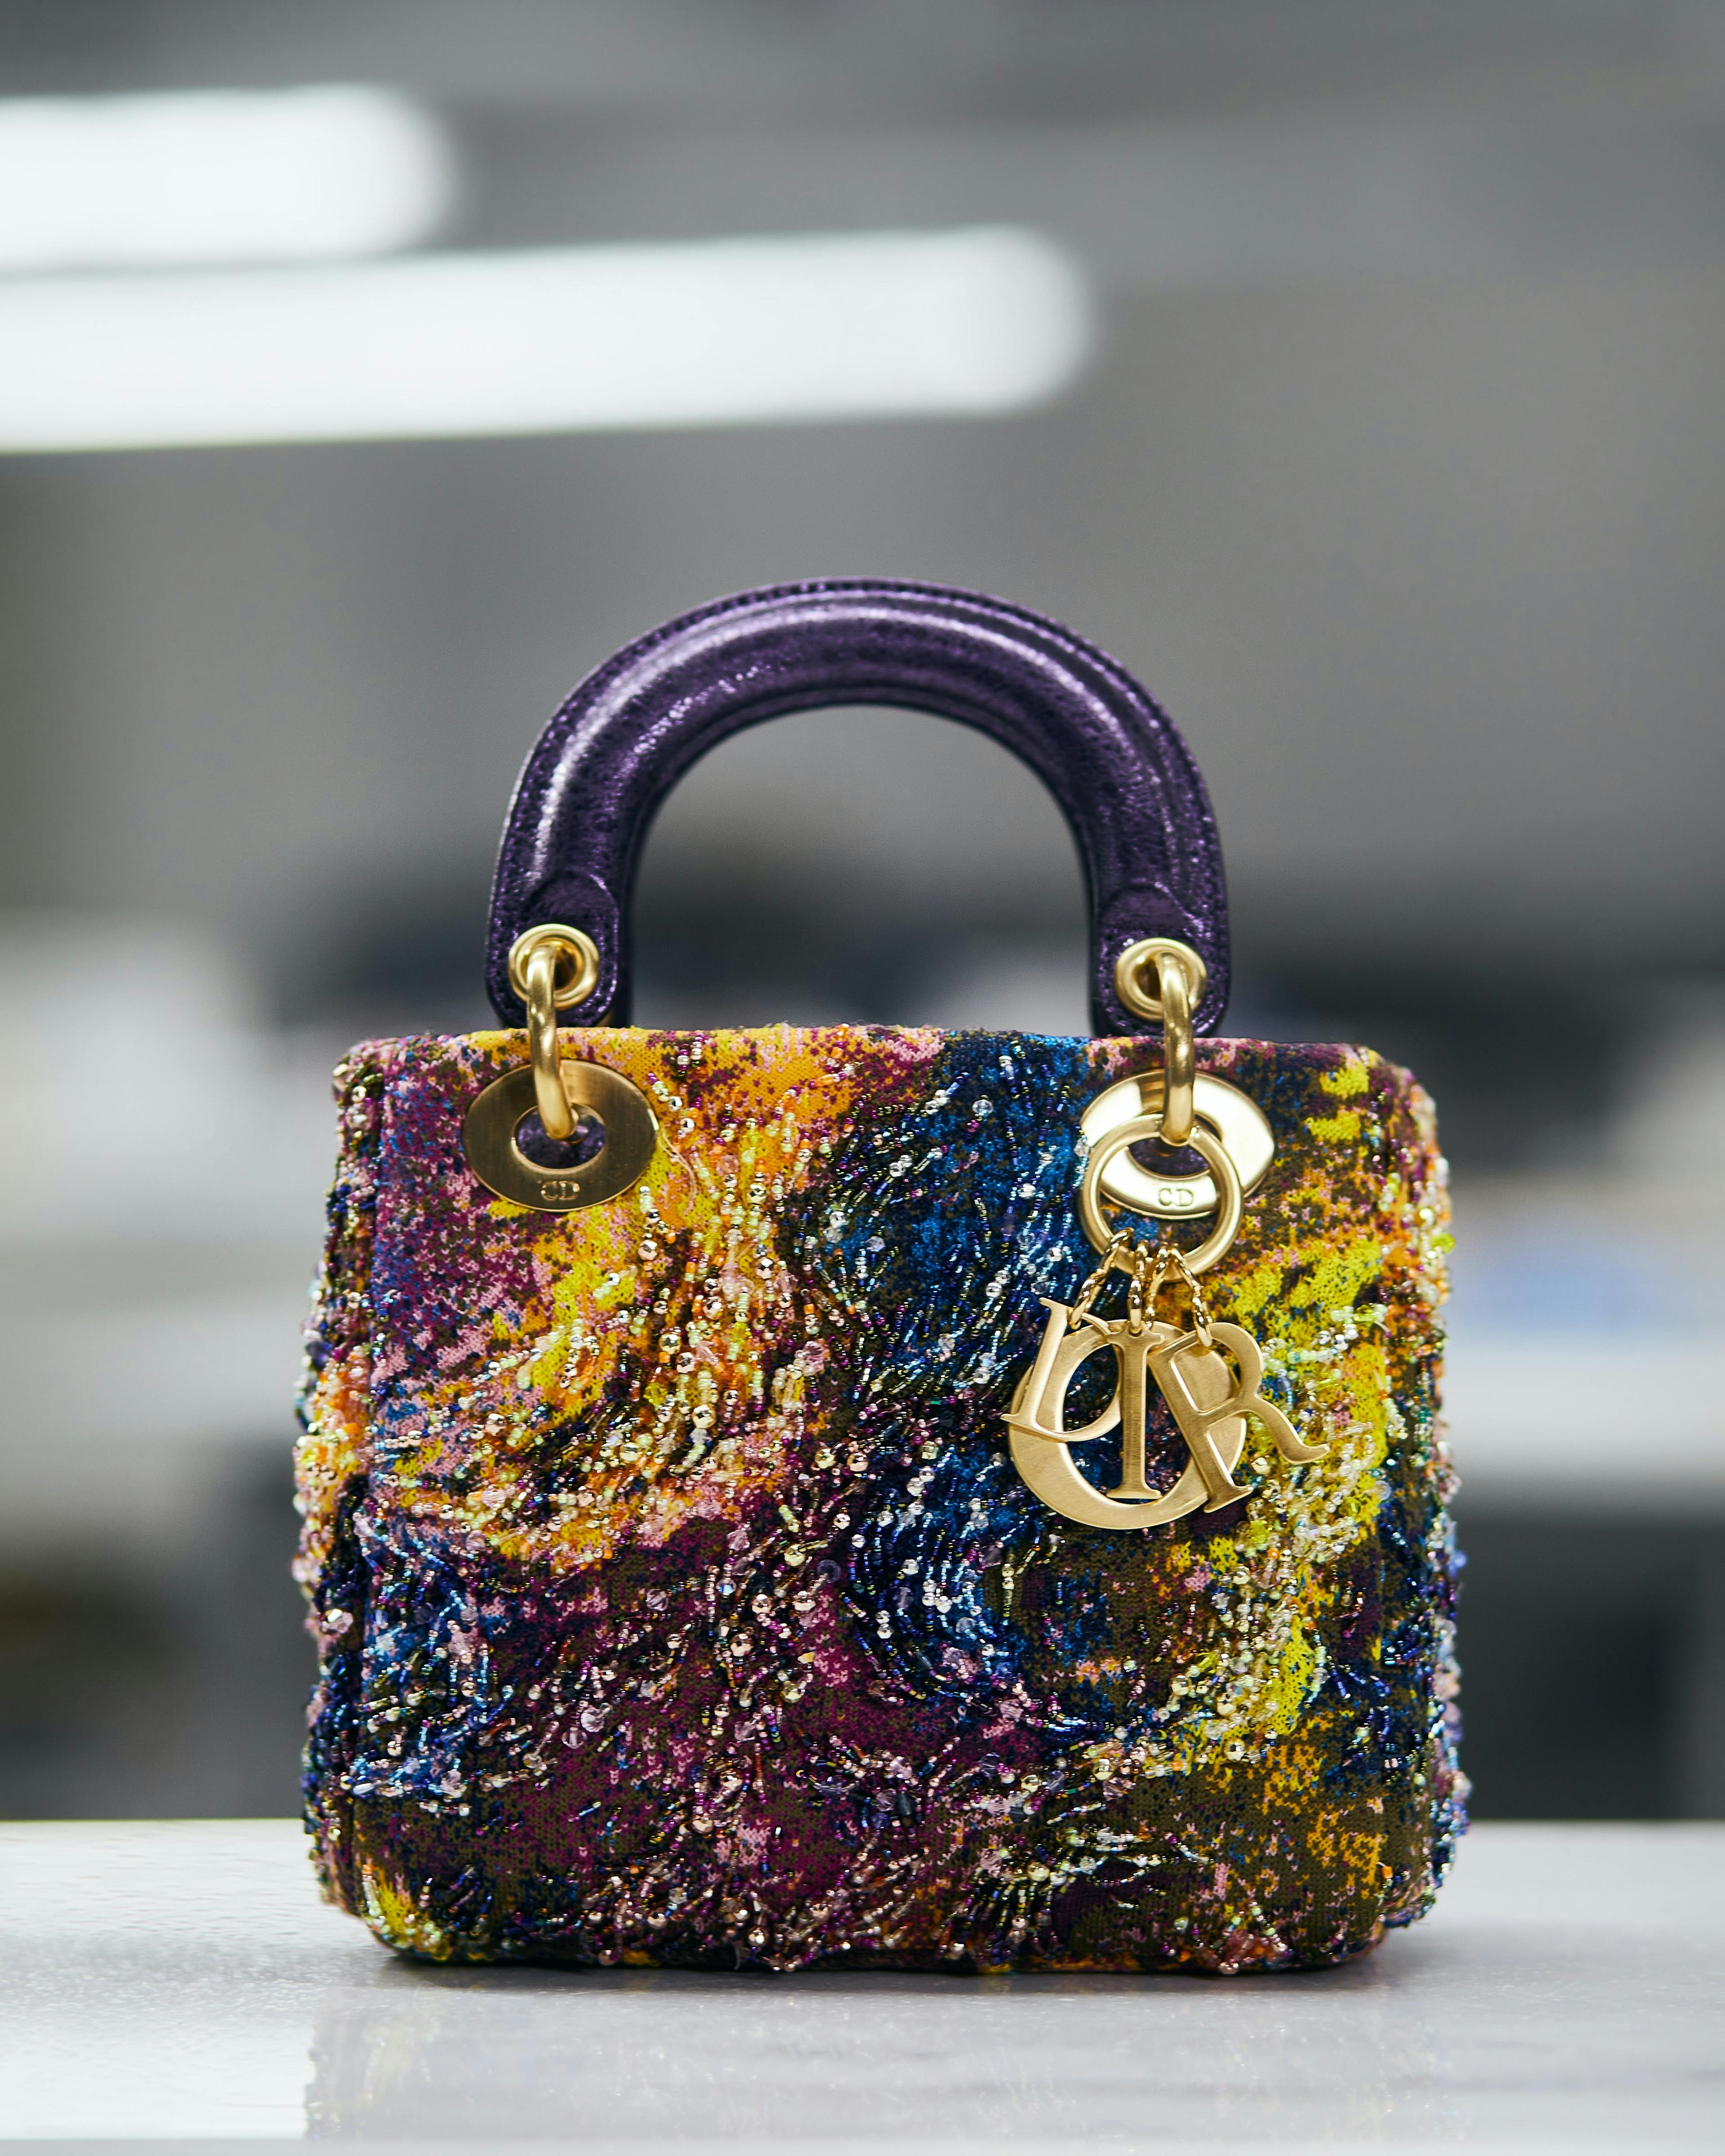 Lady Dior Art 10 new artists revisit the iconic Lady Dior bag